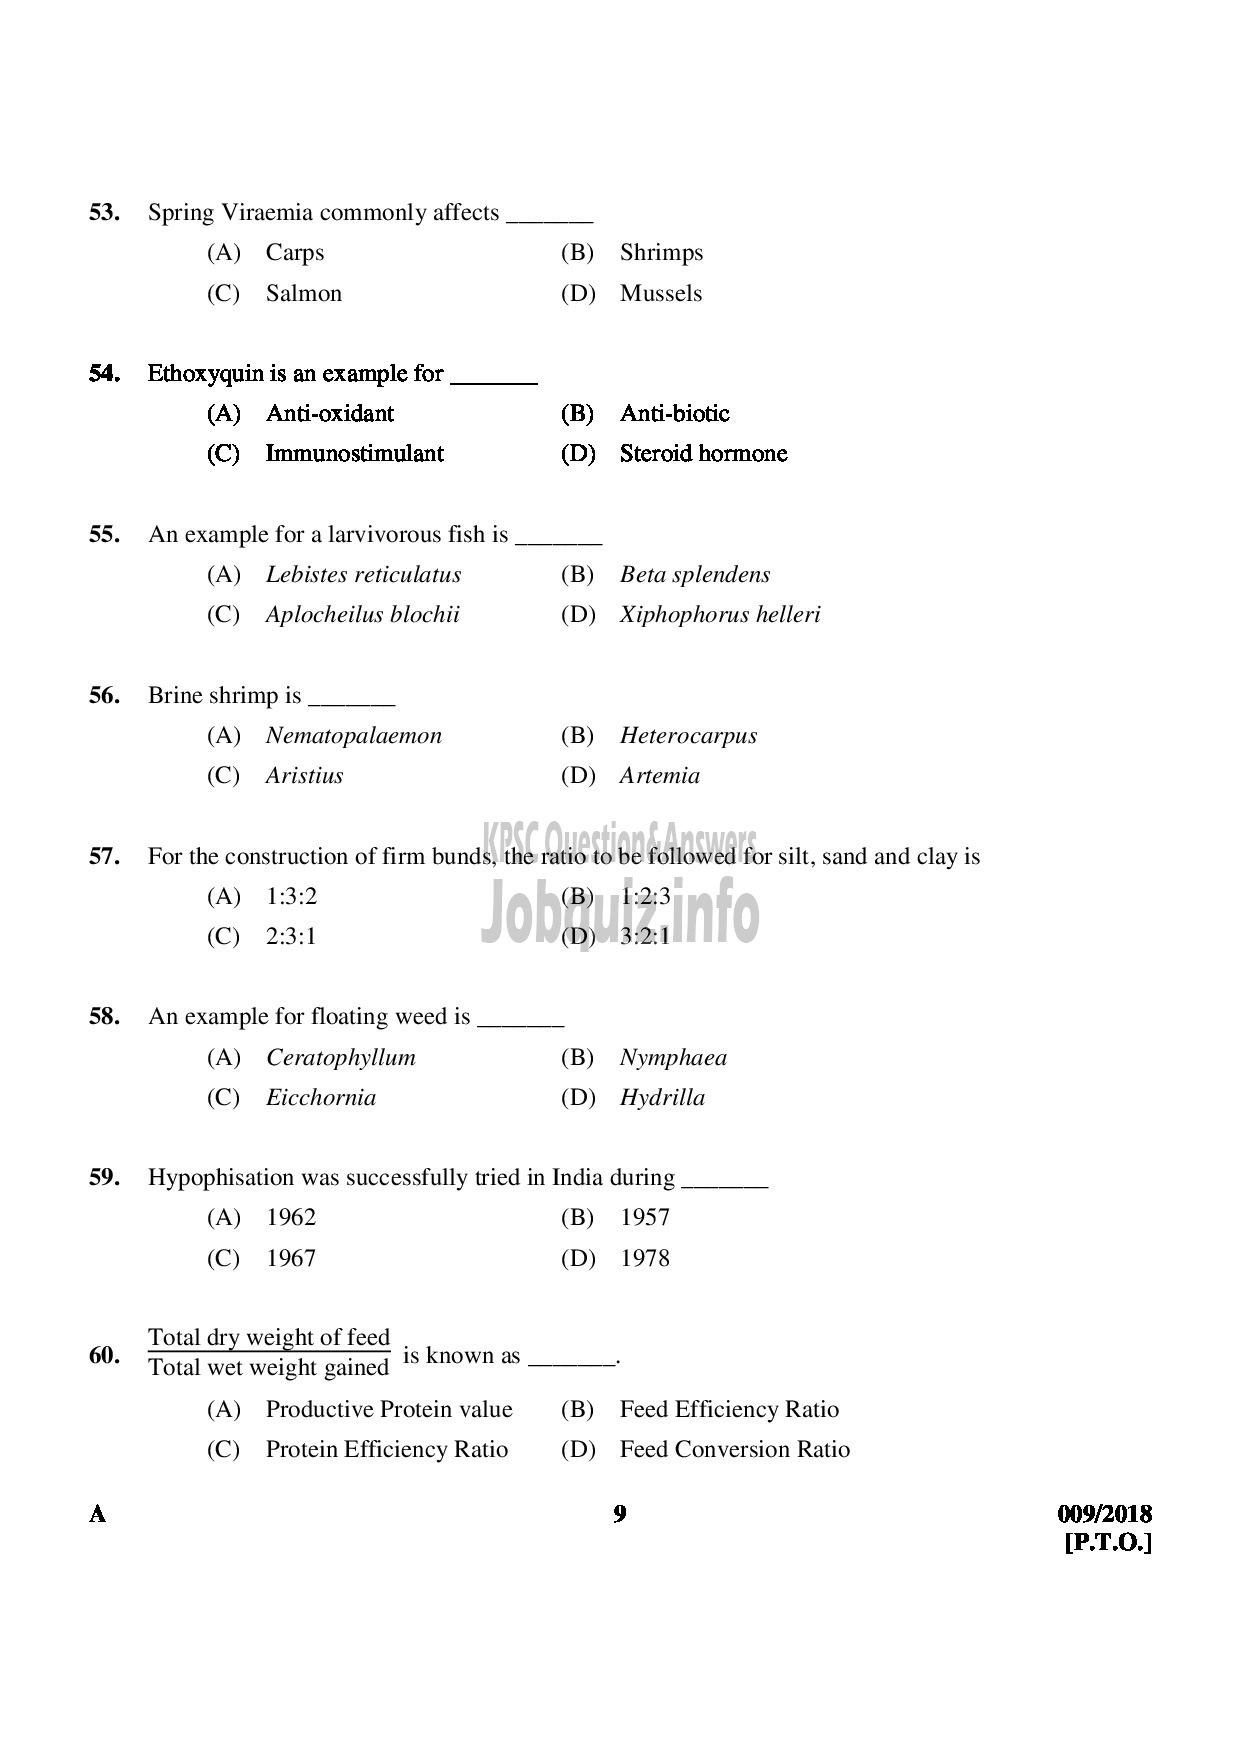 Kerala PSC Question Paper - VOCATIONAL INSTRUCTOR IN FISHERIES VOCATIONAL HIGHER SECONDARY EDUCATION-9